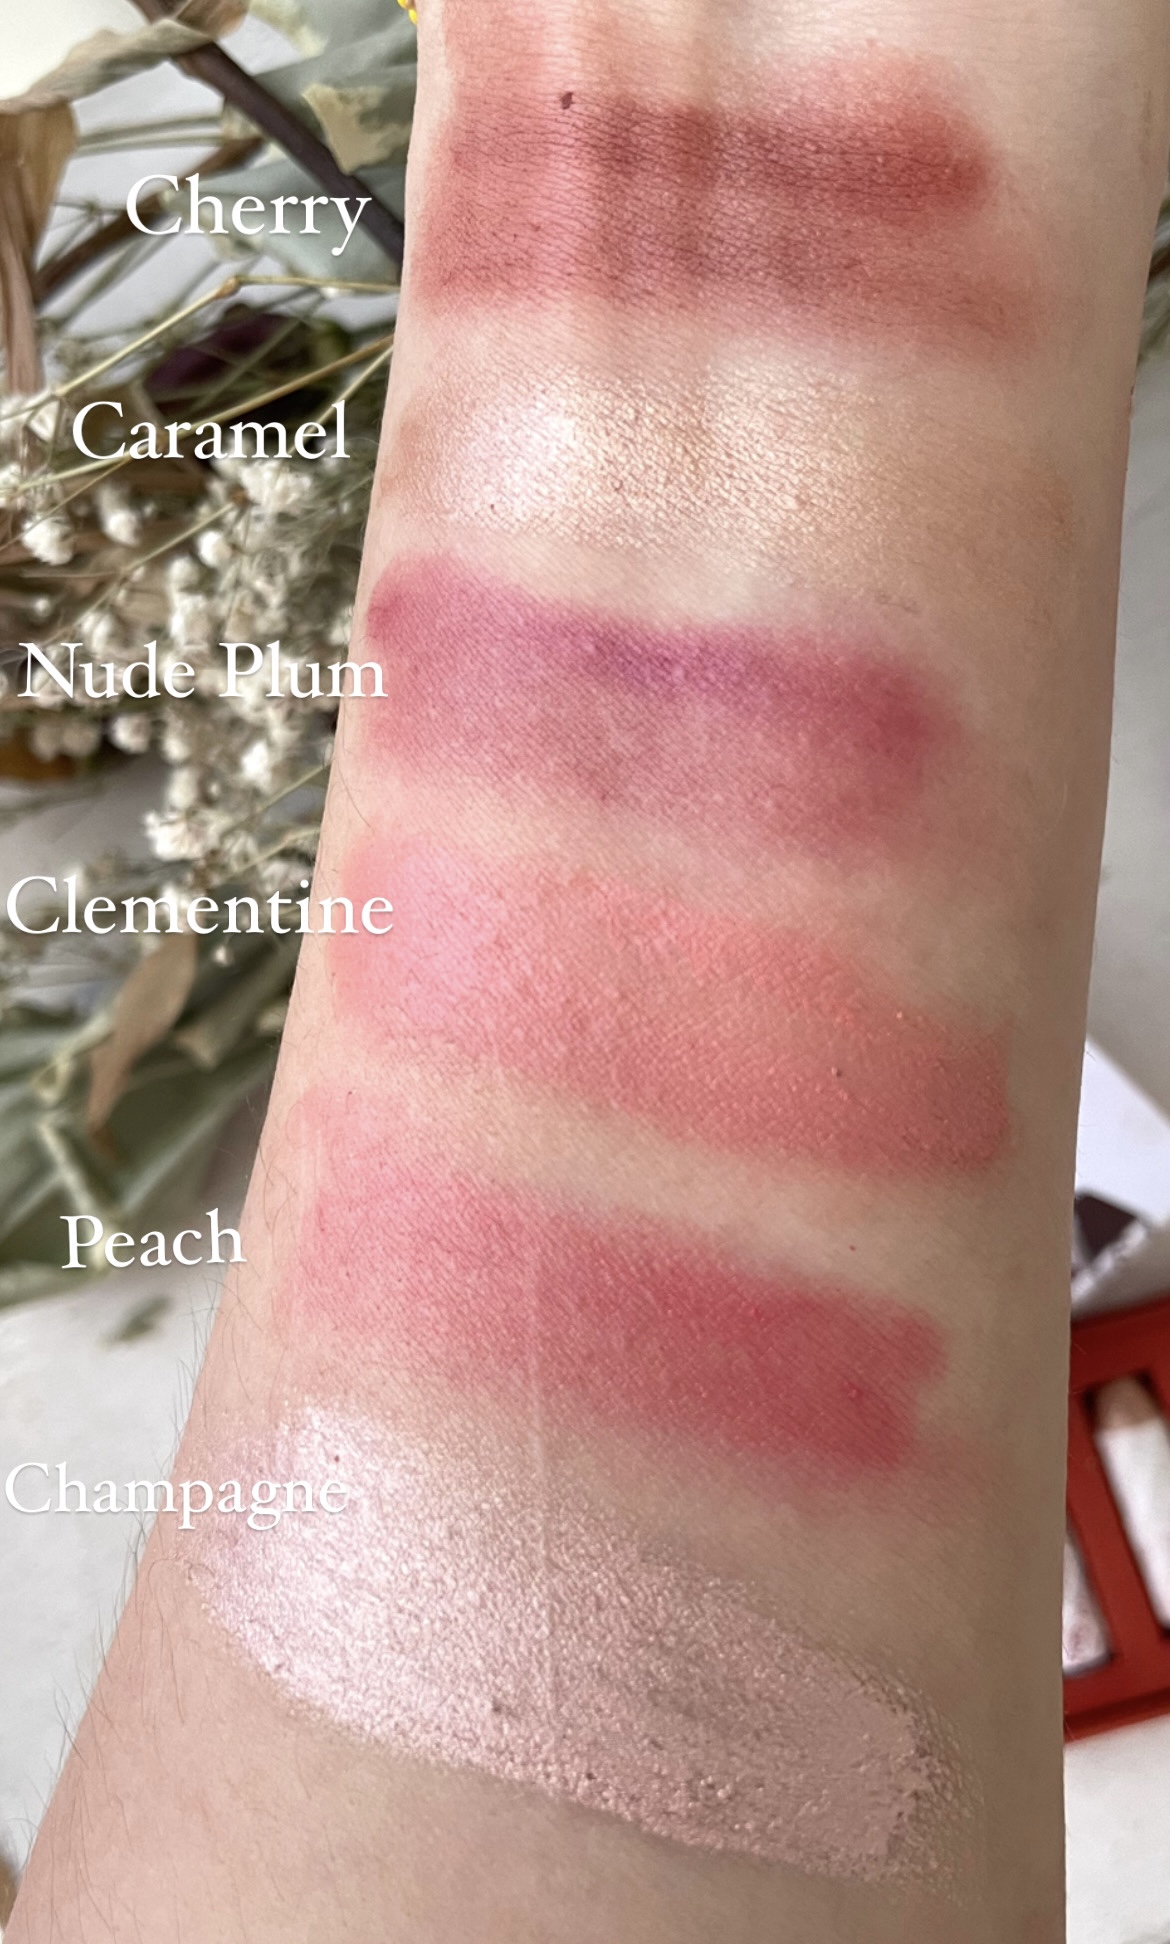 Axiology swatches